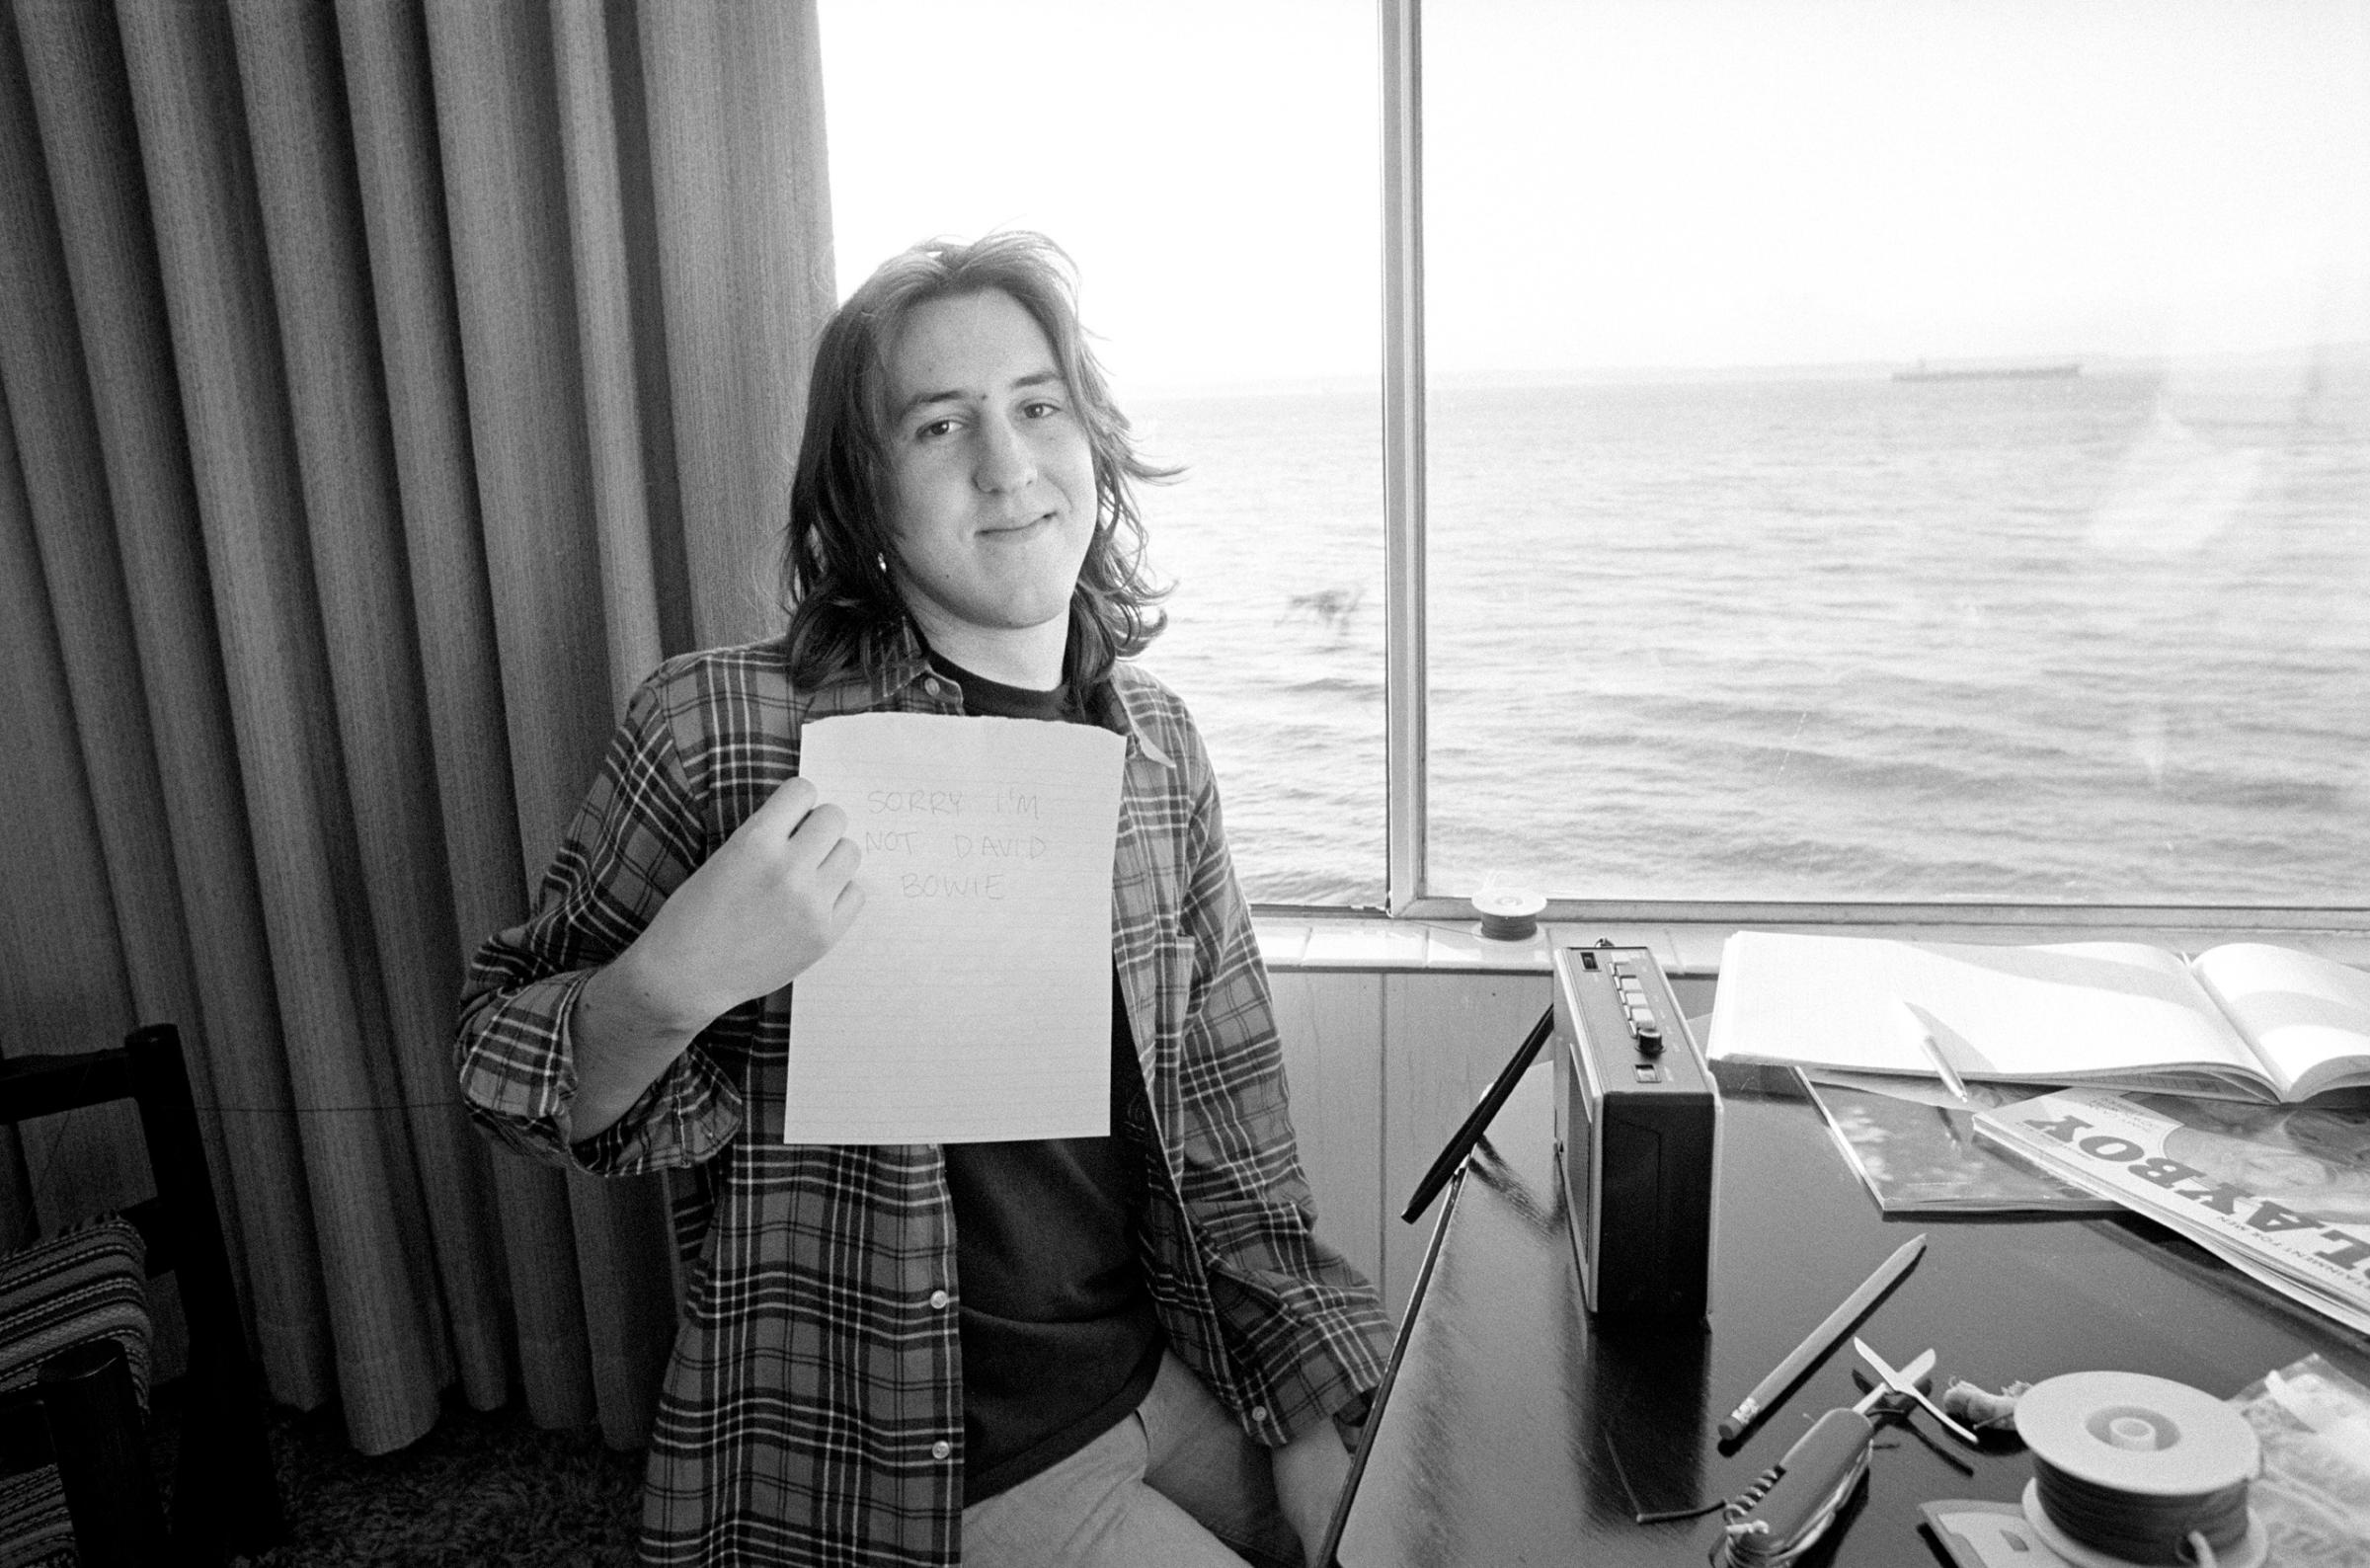 Rolling Stone magazine's 18 year old reporter Cameron Crowe holds a sign he wrote stating, " Sorry I'm not David Bowie". He created the sign for the fans that were attempting to access their icon at the hotel in Seattle.